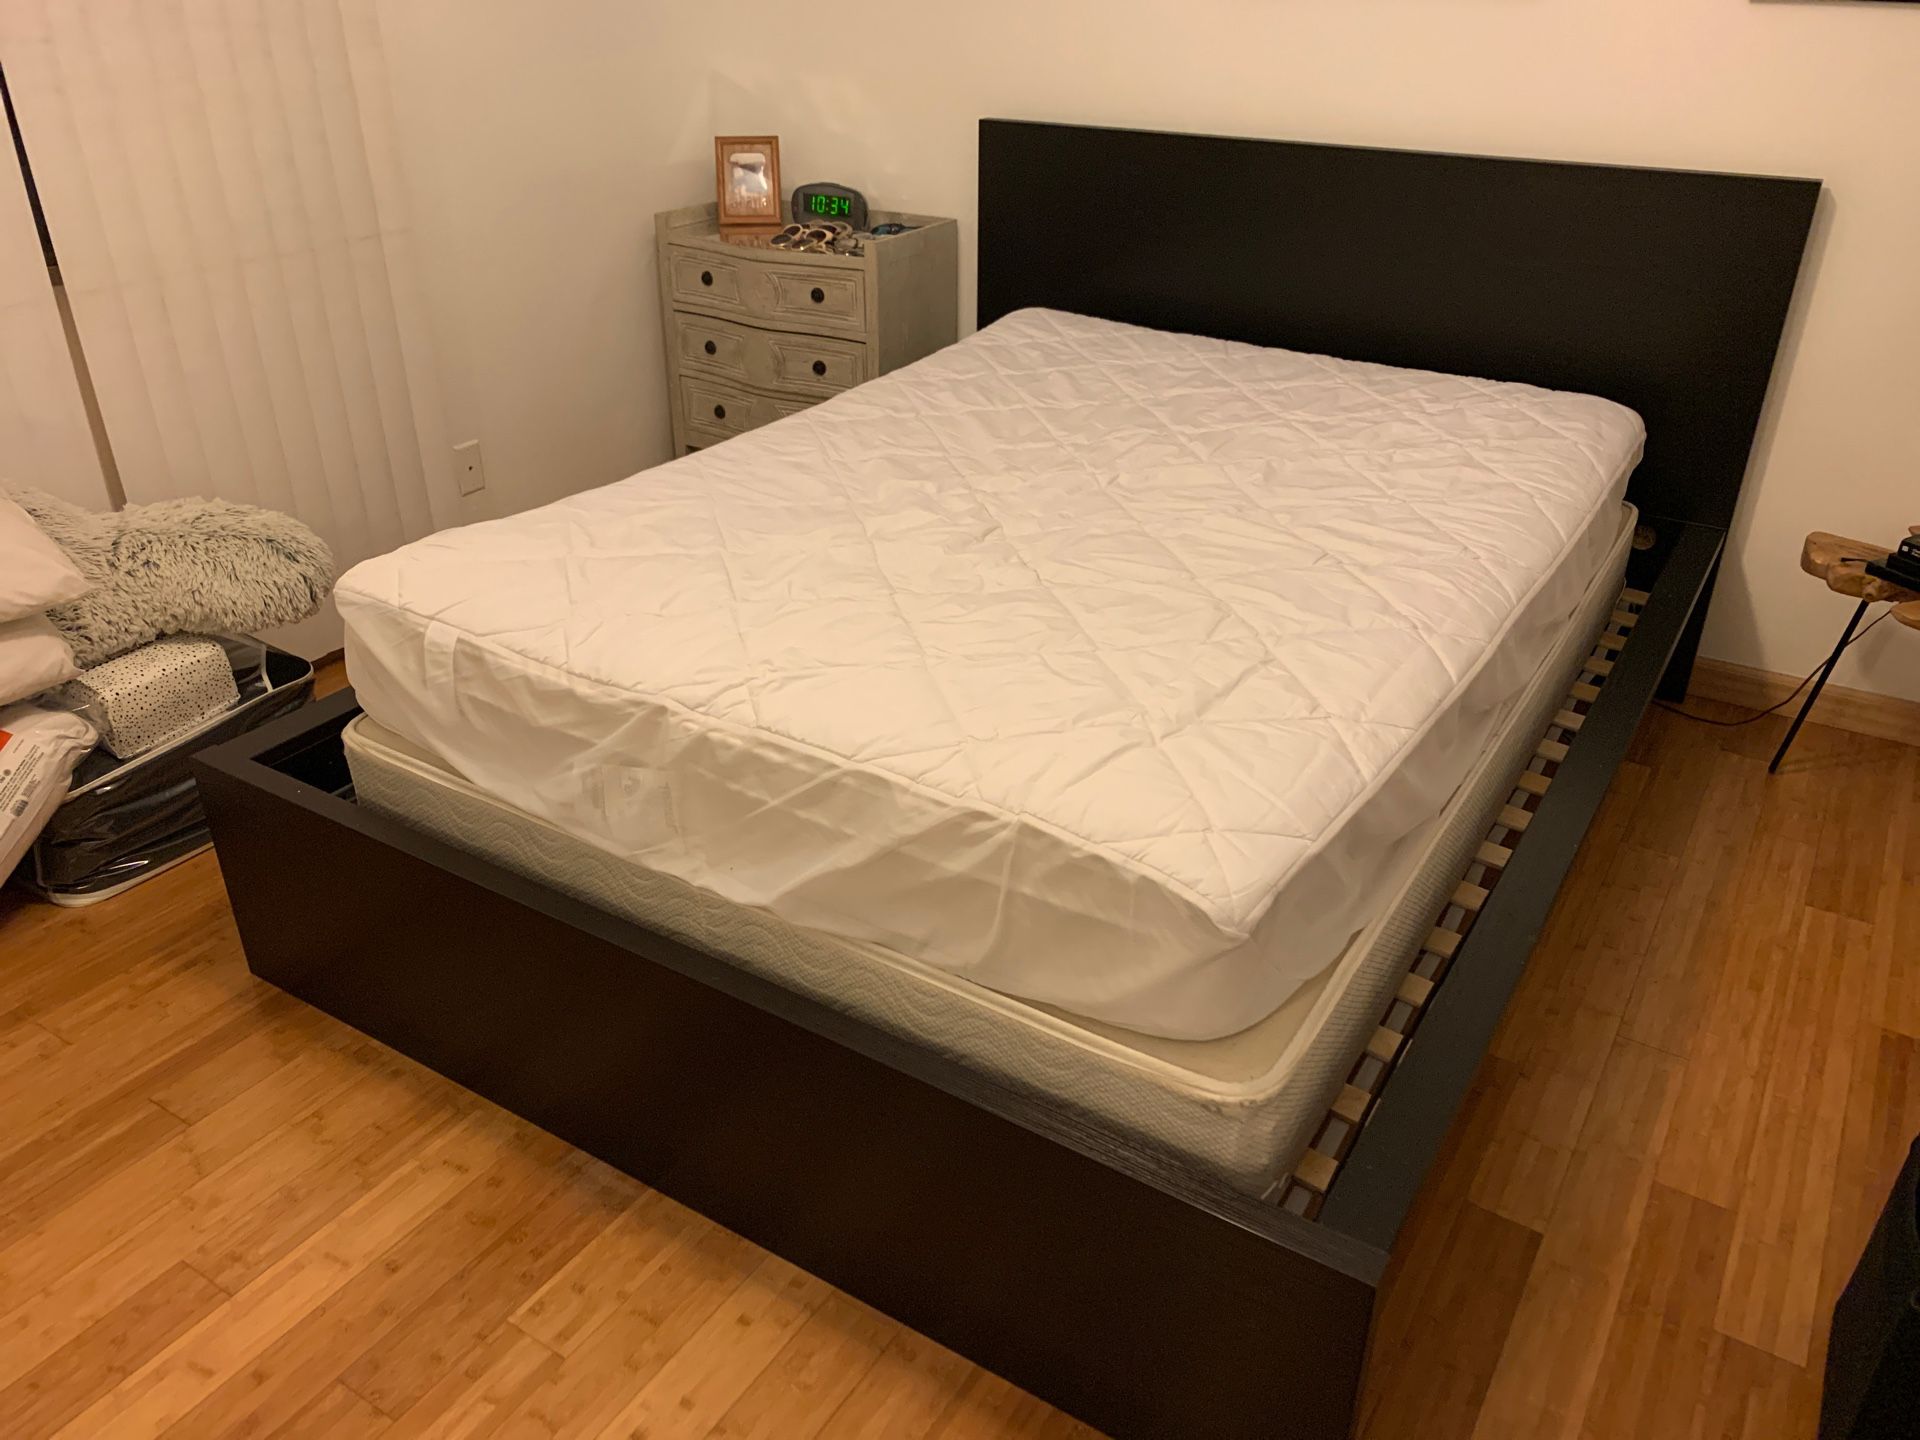 FREE Full Size mattress and box spring